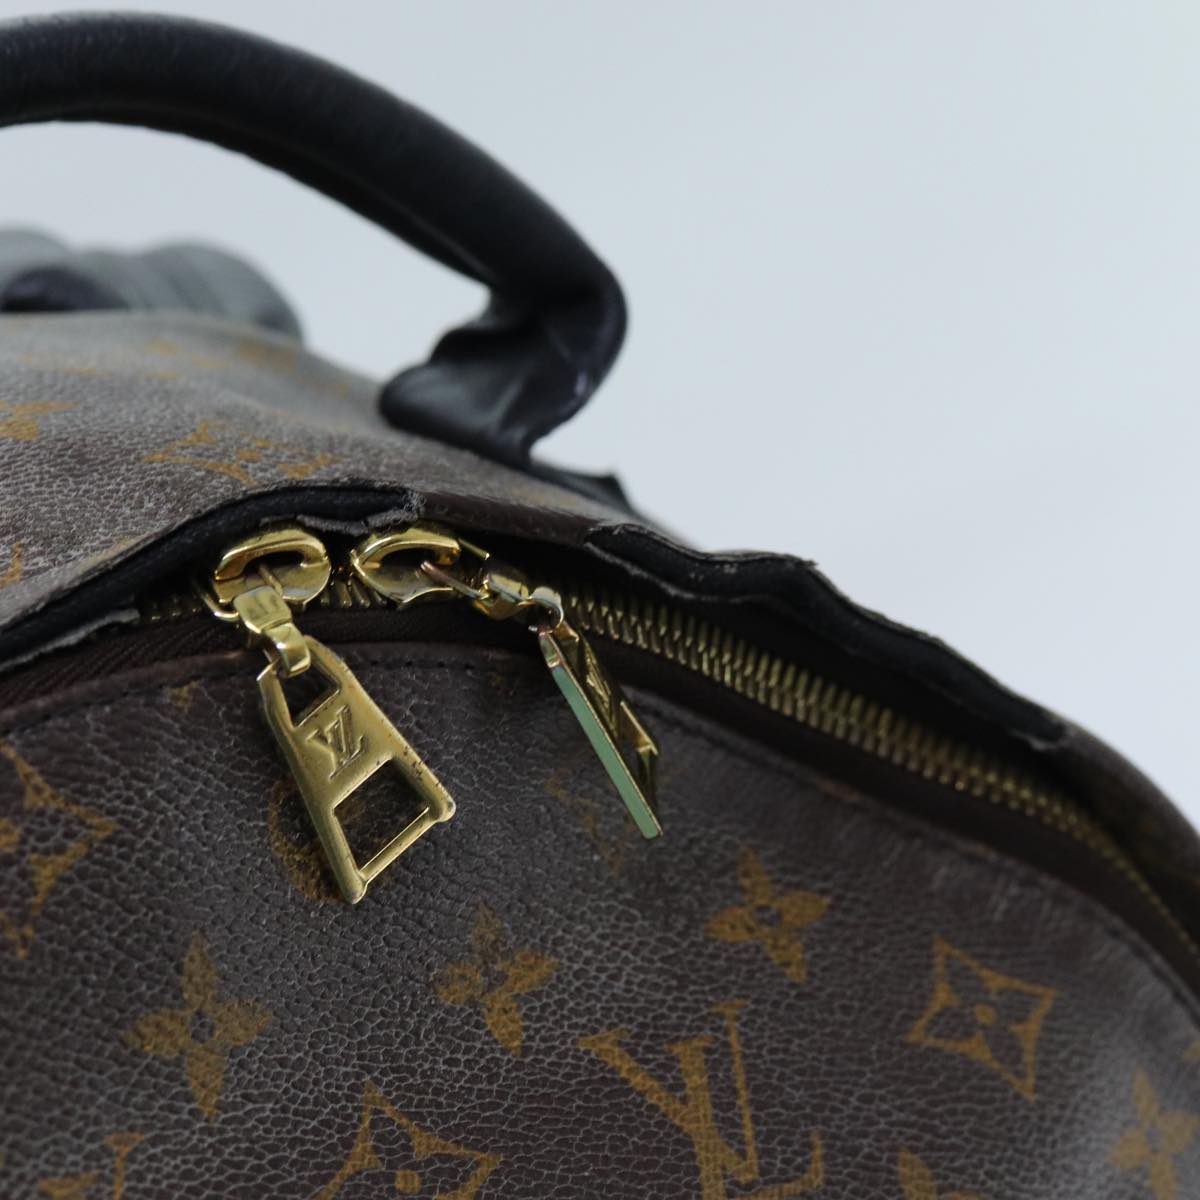 LOUIS VUITTON Monogram Palm Springs MM Backpack M44874 LV Auth ep4014